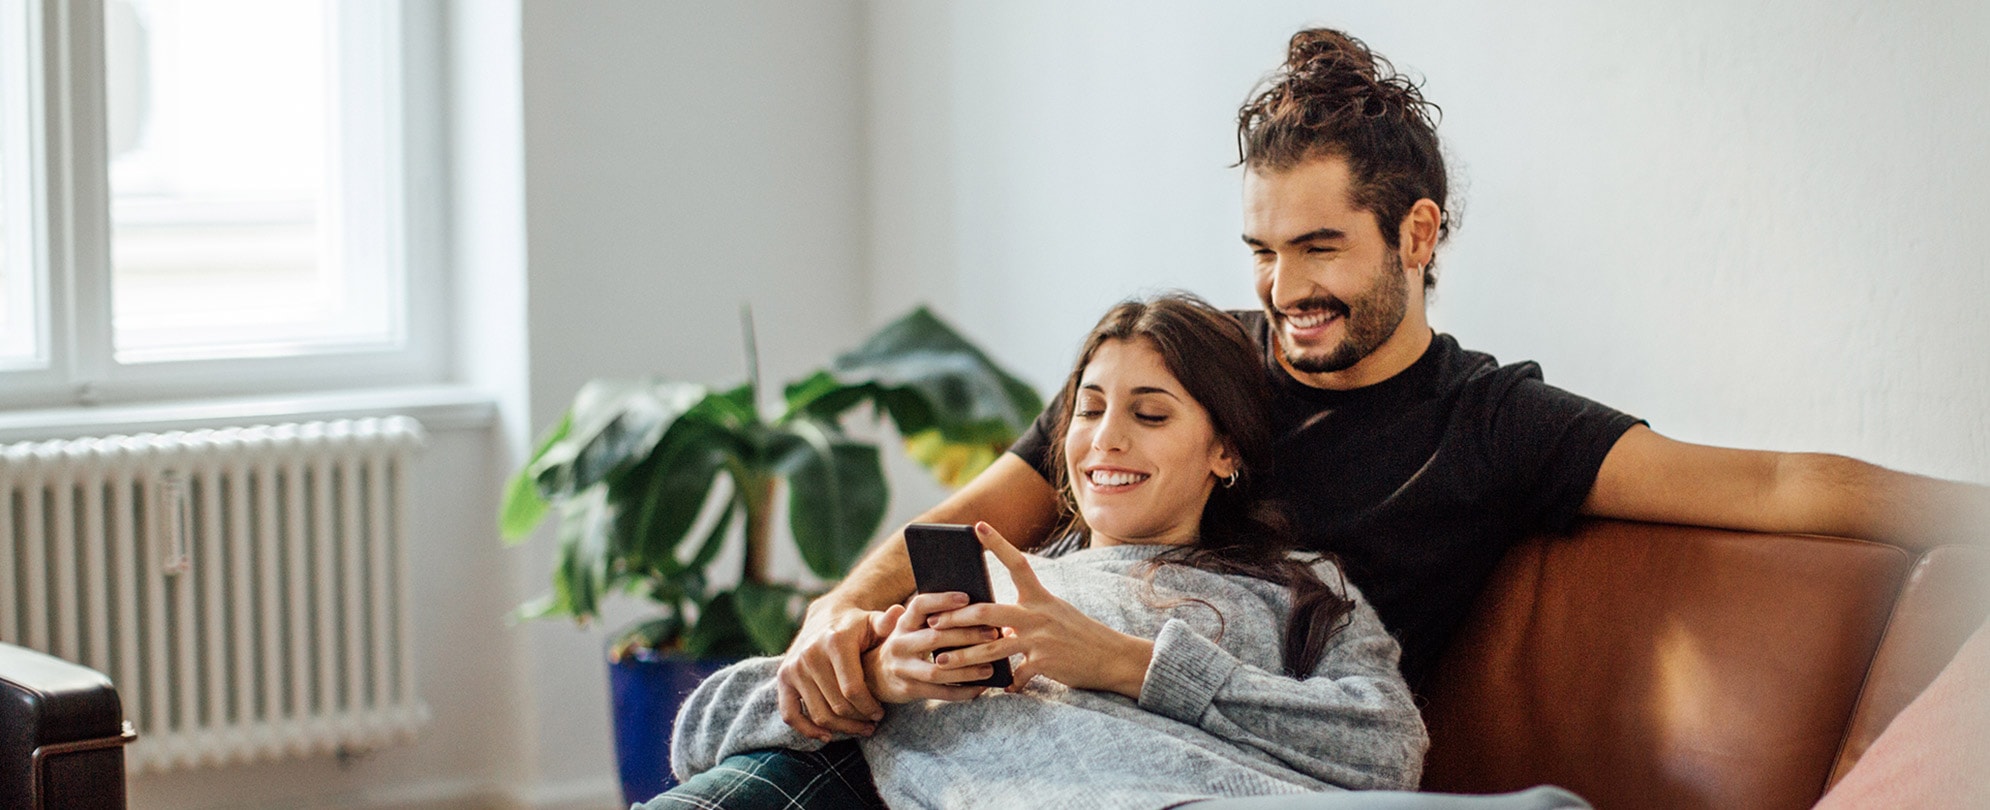 A man and woman sitting on a sofa together, smiling while looking at a cell phone.